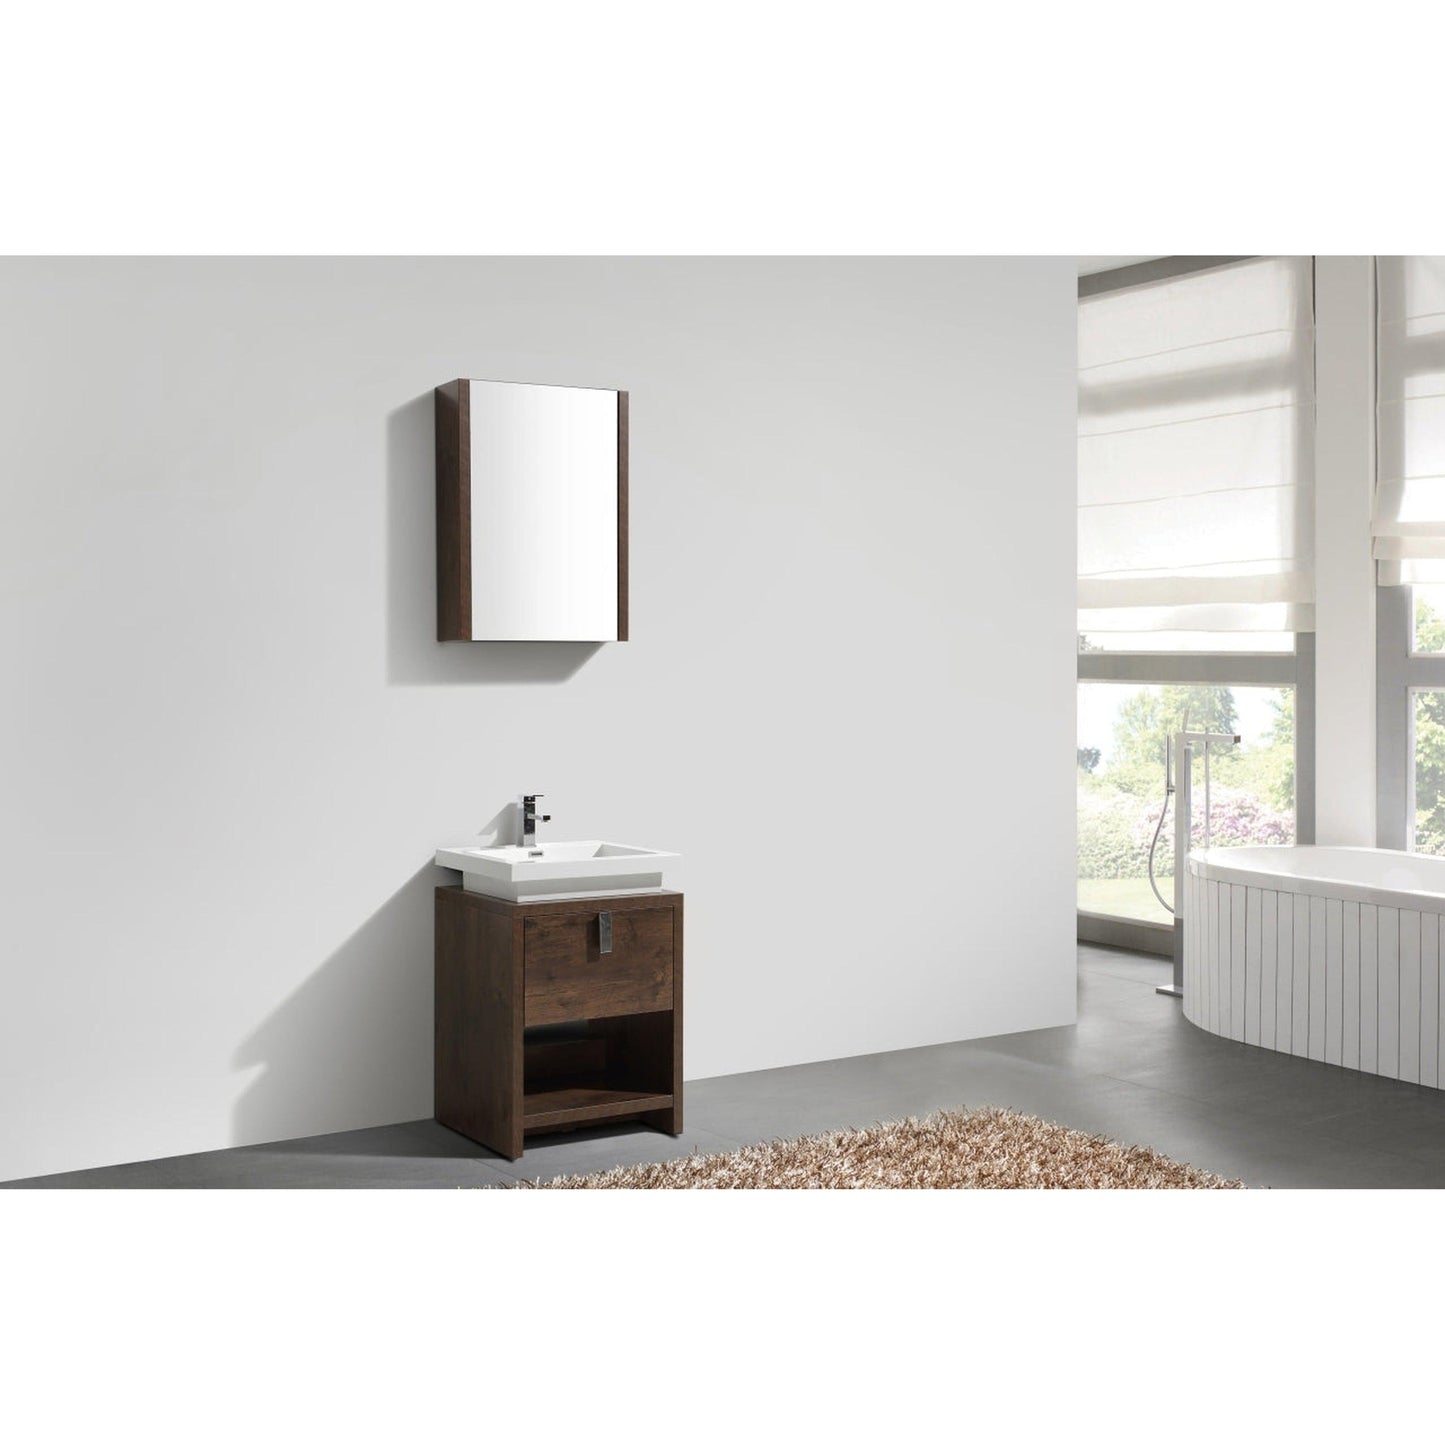 KubeBath Levi 24" Rose Wood Freestanding Bathroom Vanity With Cubby Hole & Reinforced Acrylic Composite Sink With Rectangular Chrome Overflow